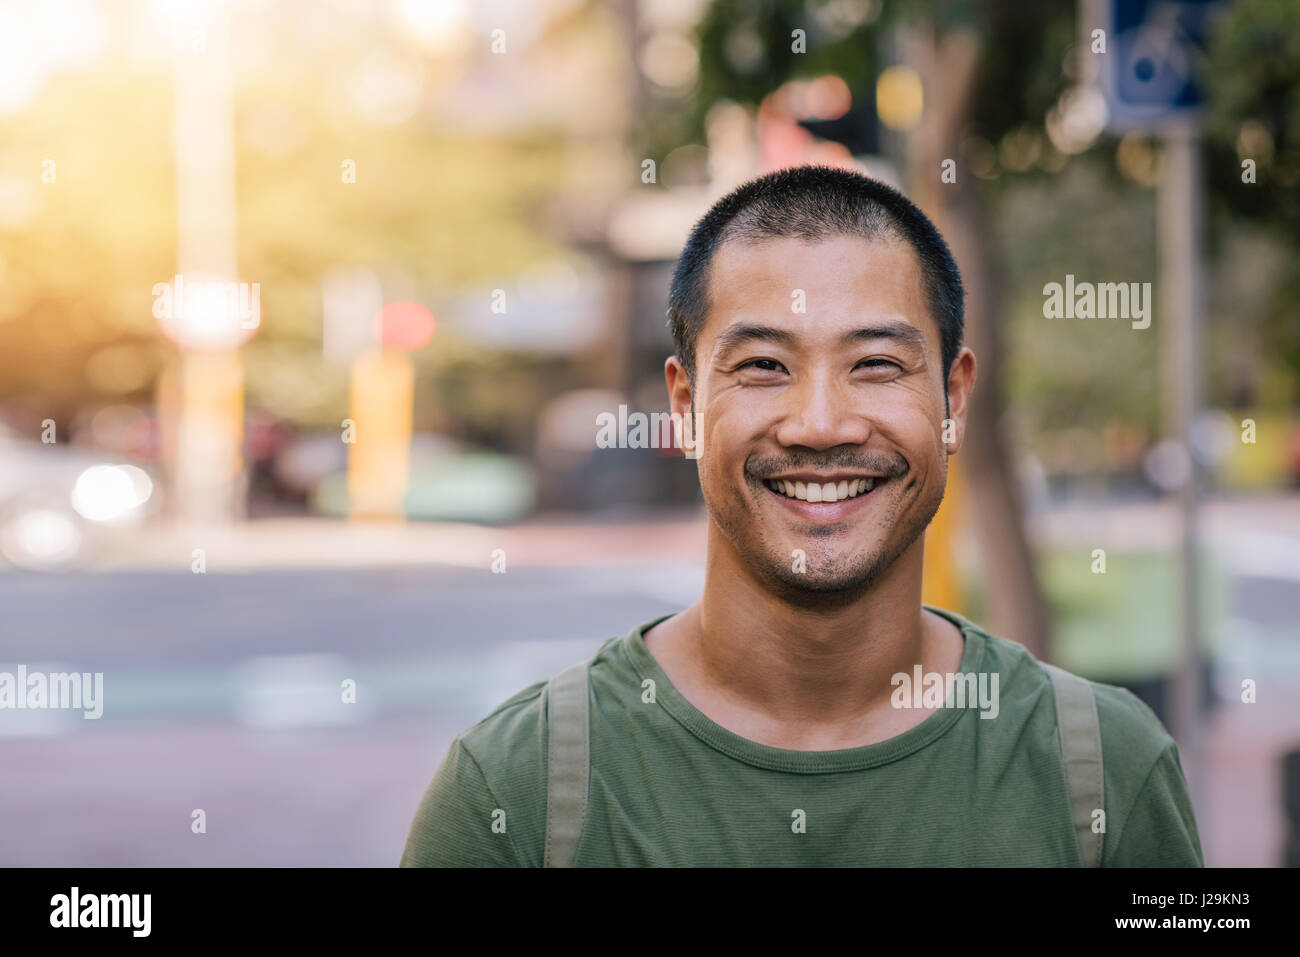 Young Asian man smiling confidently on a city street Stock Photo